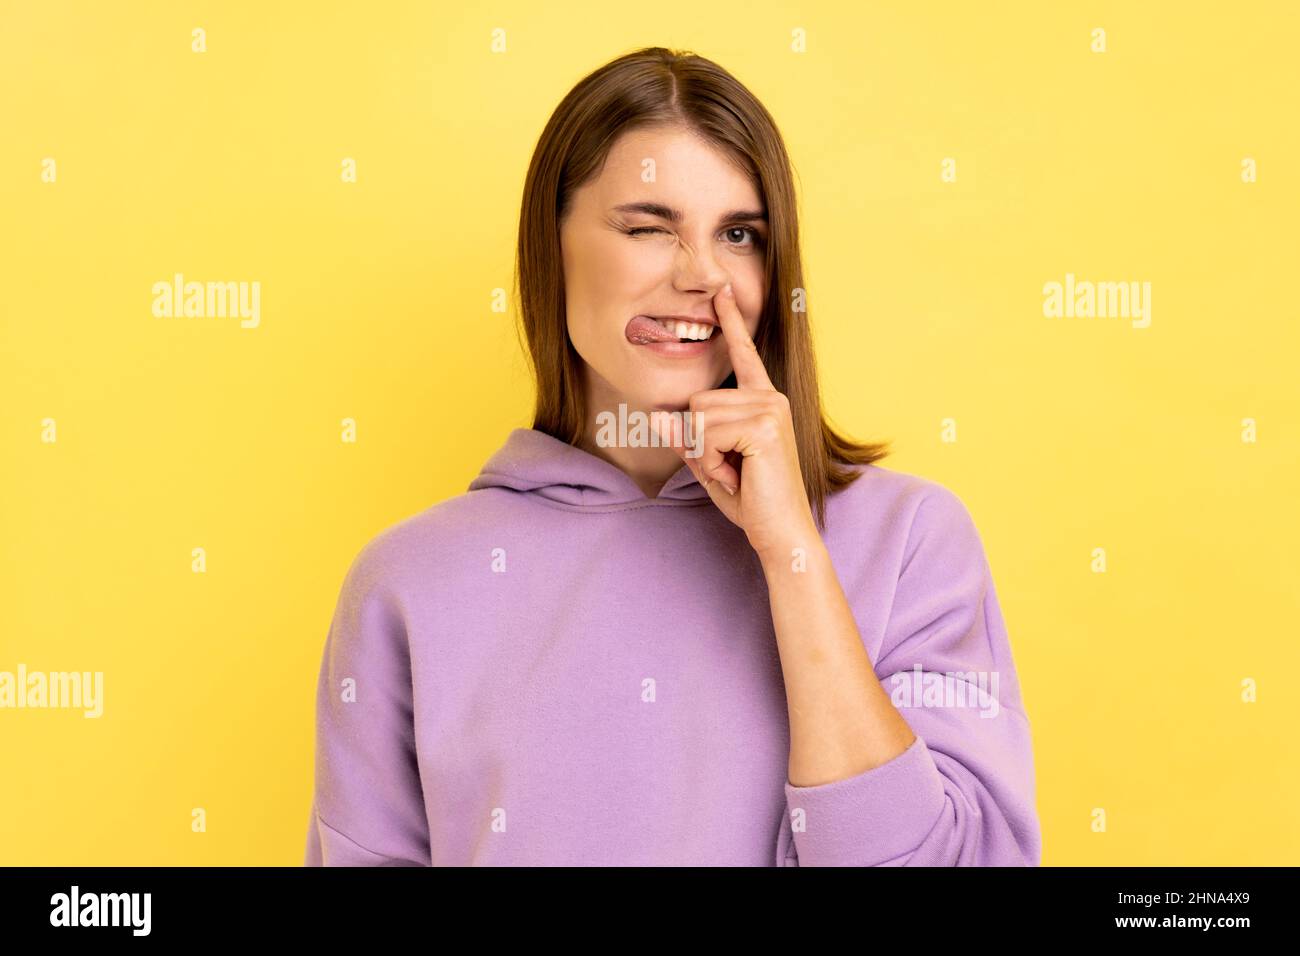 Crazy weird woman with brown hair holding finger in her nose showing tongue, uncultured bored girl having fun, bad manners, wearing purple hoodie. Indoor studio shot isolated on yellow background. Stock Photo